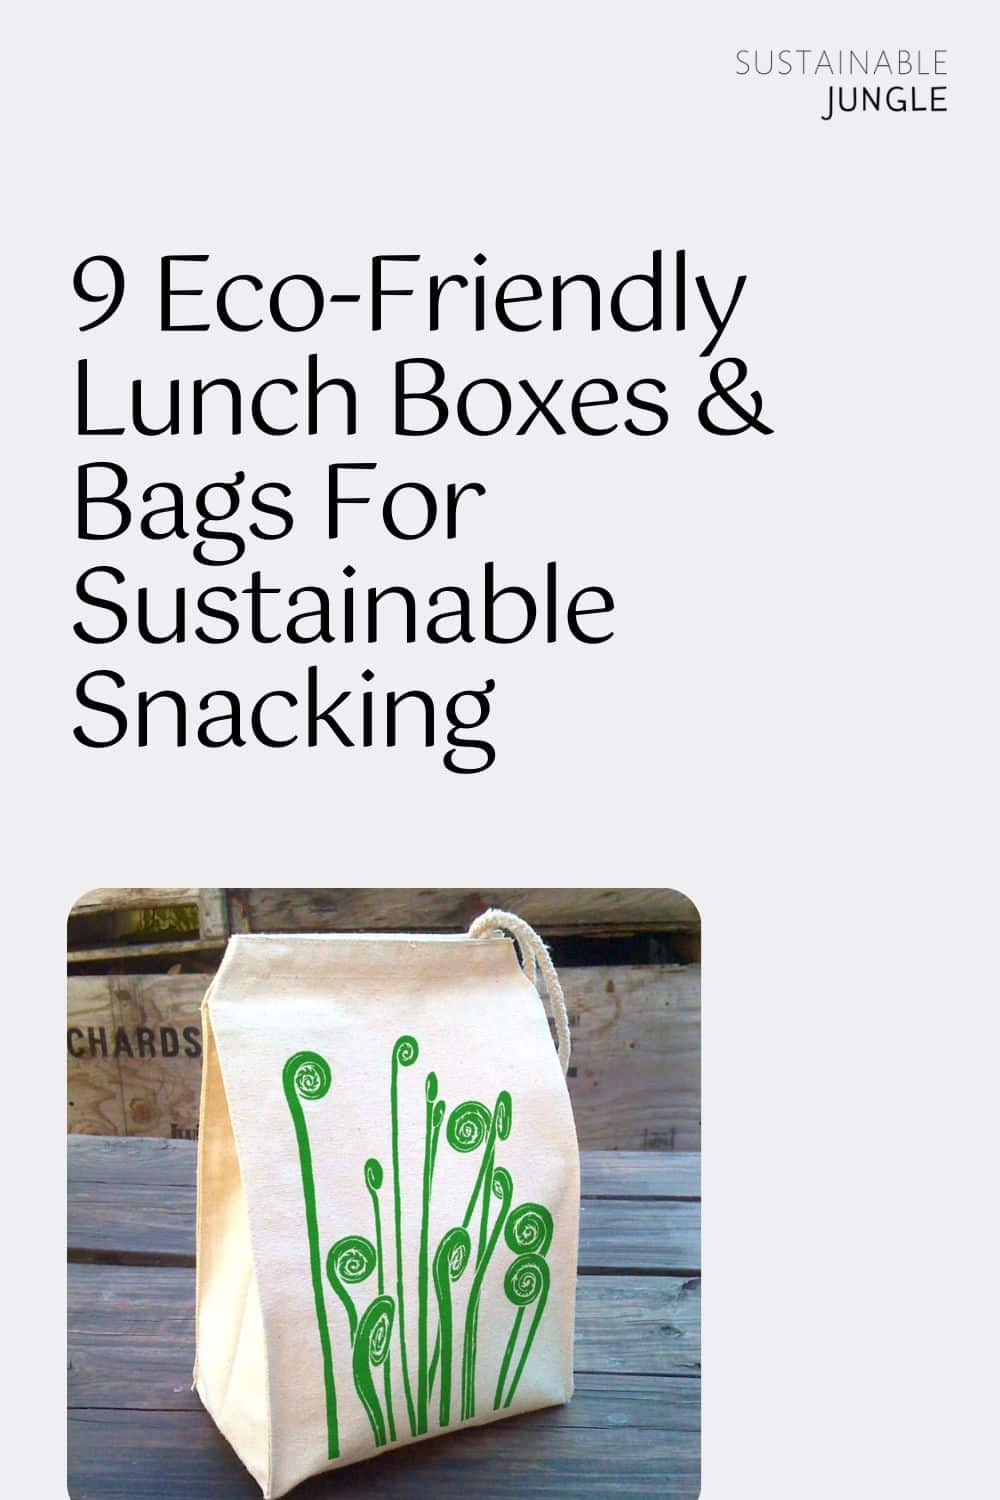 9 Eco-Friendly Lunch Boxes & Bags For Sustainable Snacking Image by A Little Lark #ecofriendlylunchboxes #ecofriendlybentoboxes #ecofriendlylunchbag #sustainablelunchboxes #sustainablelunchbags #ecofriendlylunchboxforadults #sustainablejungle